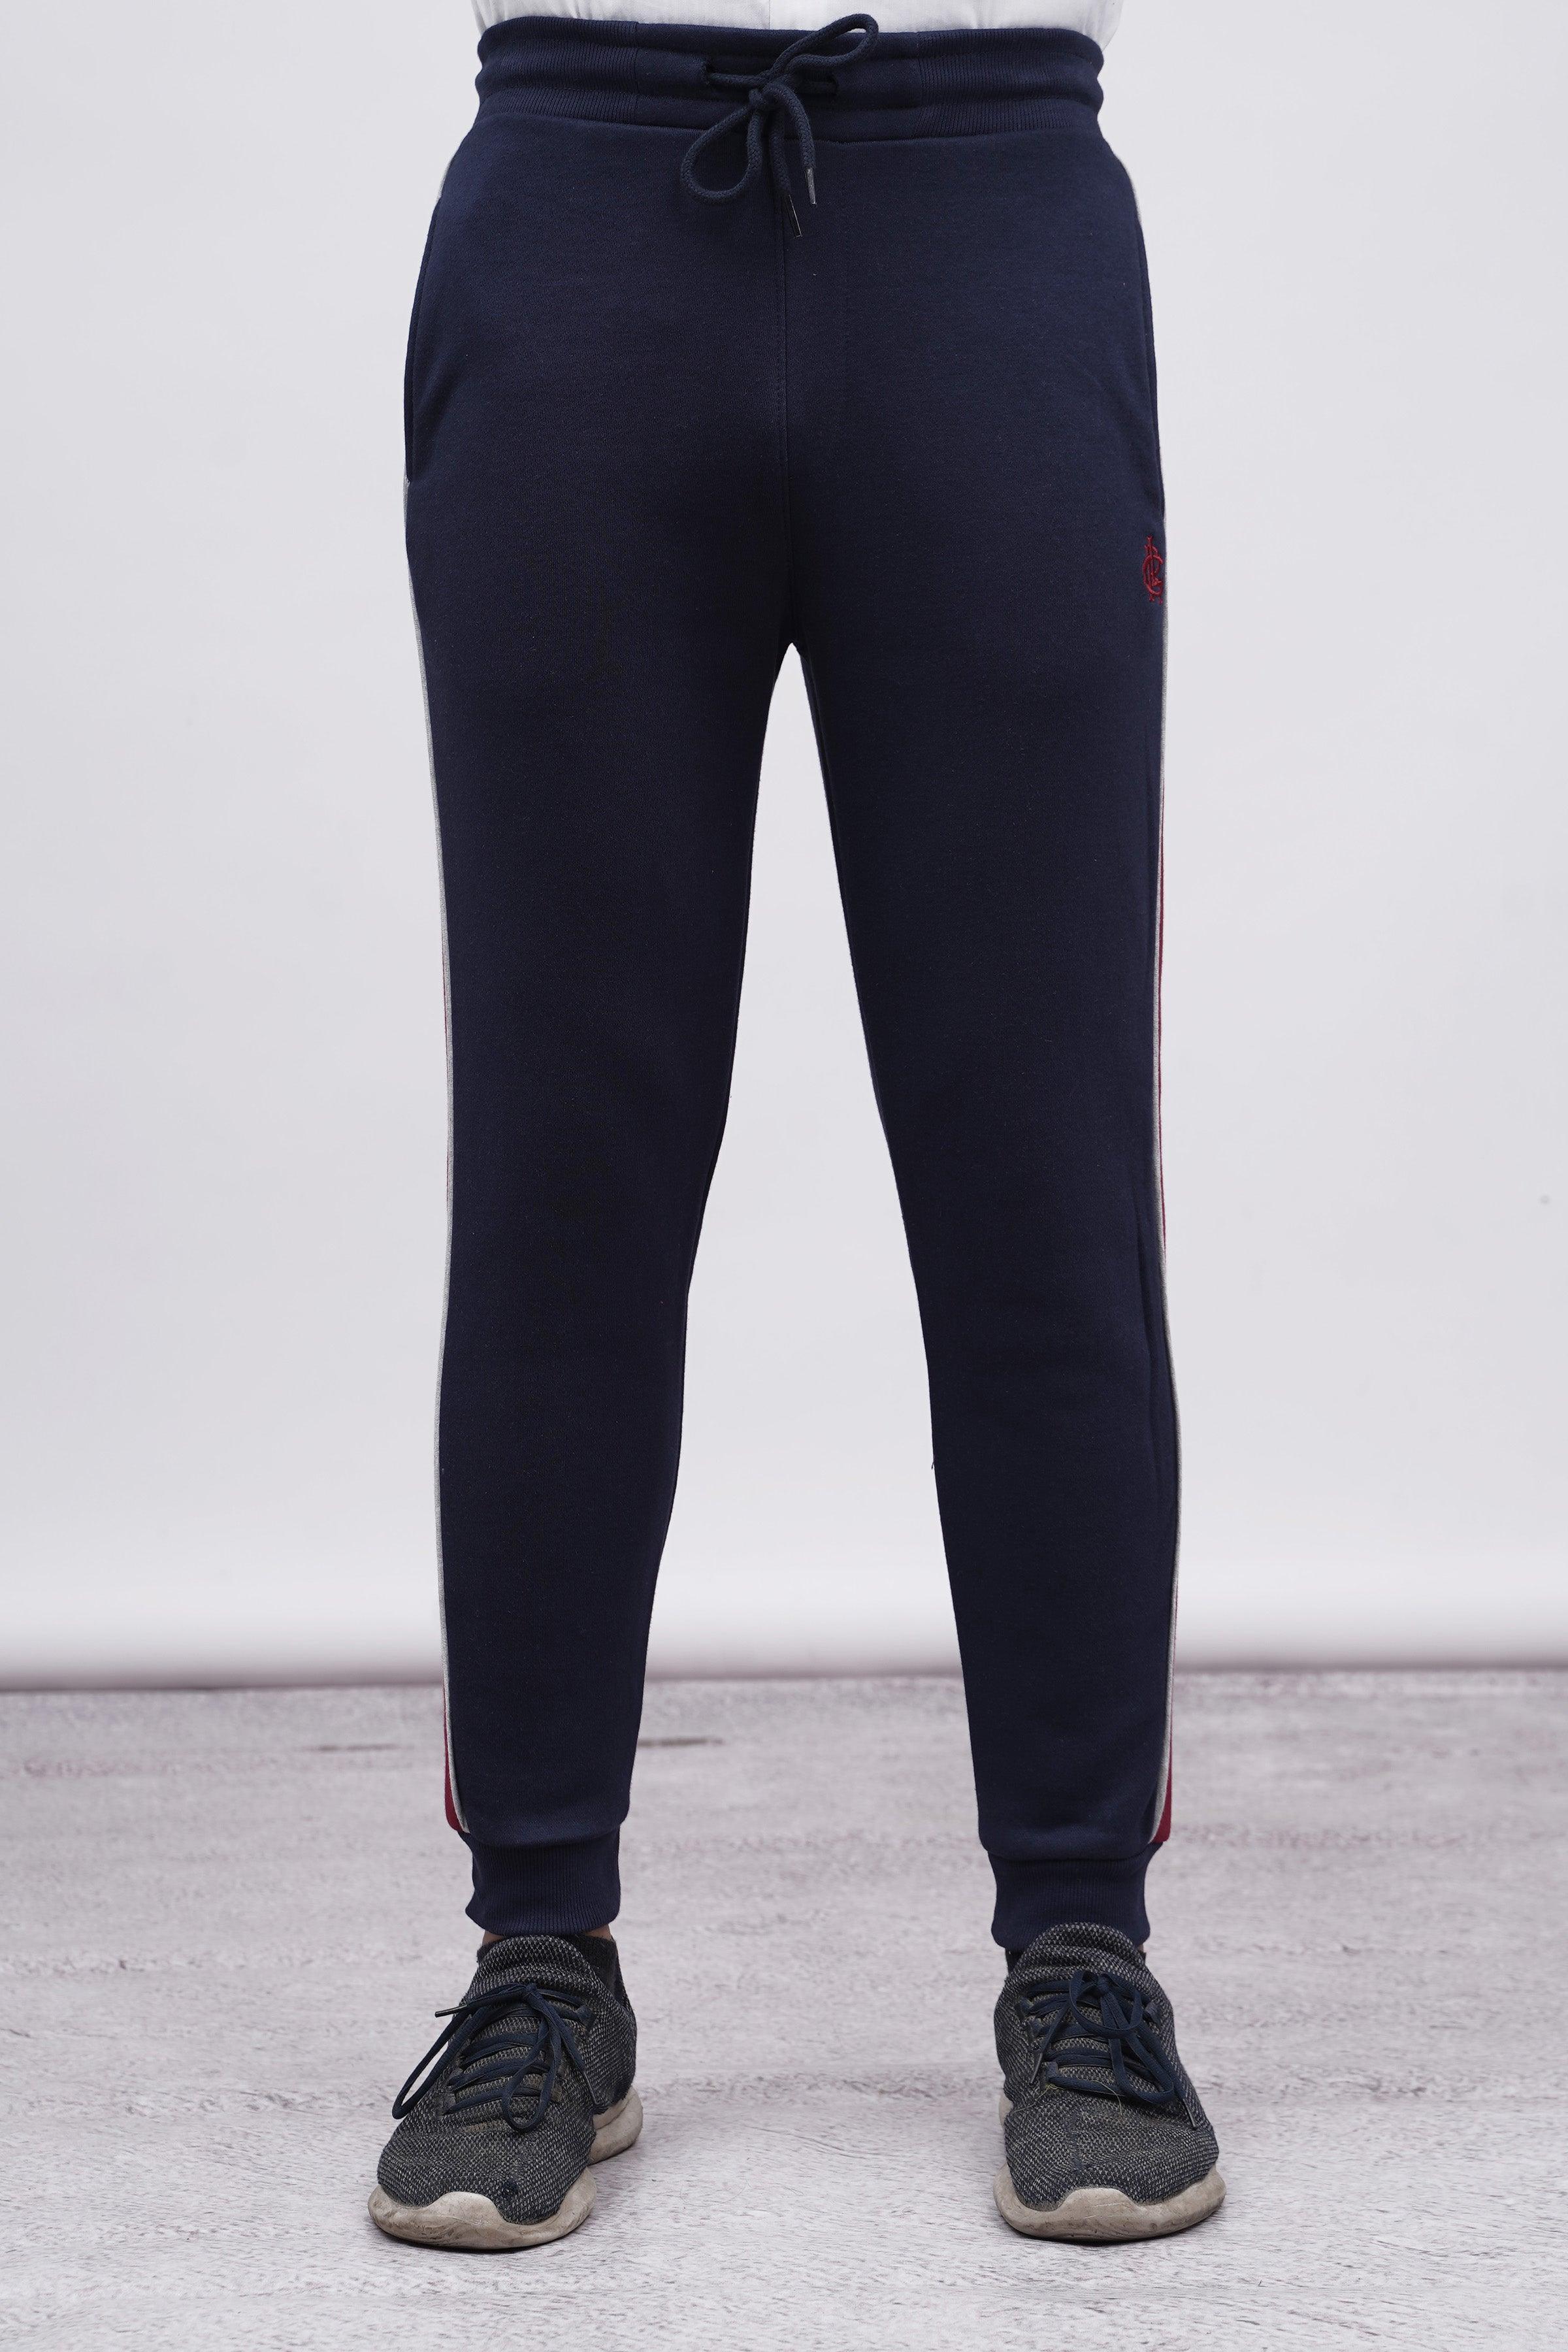 FLEECE CONTRAST PANNEL TROUSER NAVY at Charcoal Clothing